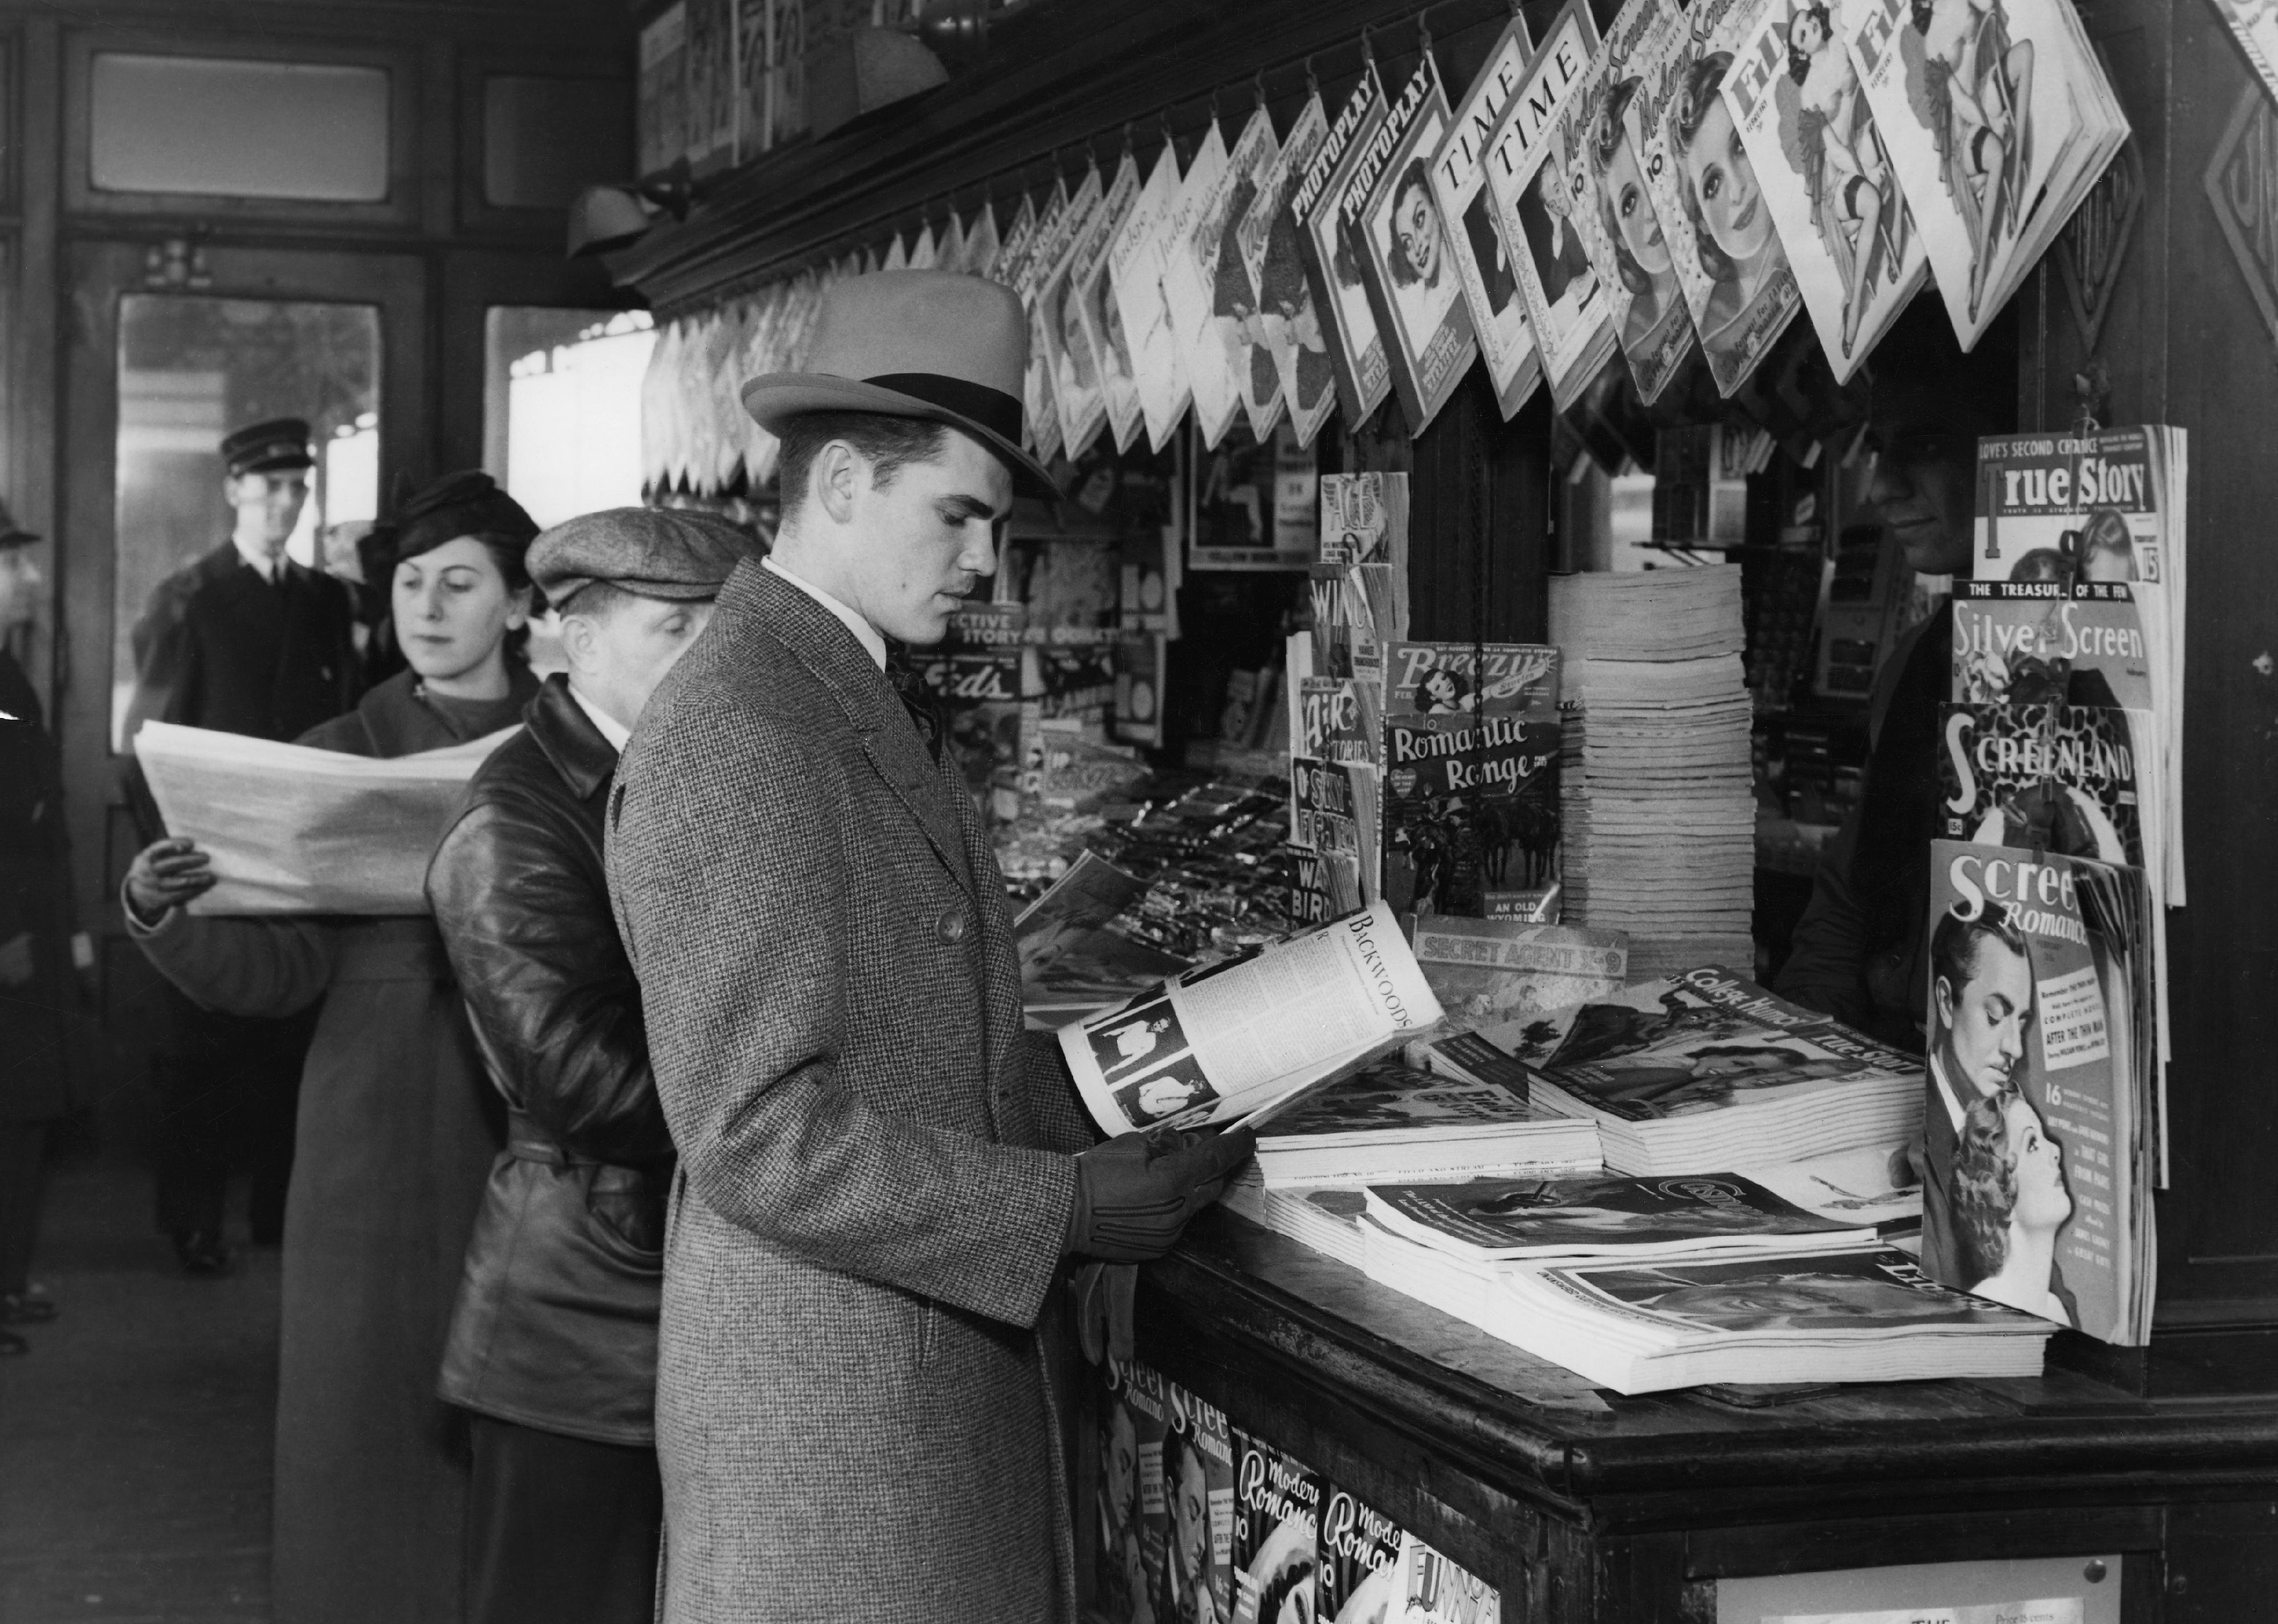 Railroad Station News Stand in NYC in 1937.